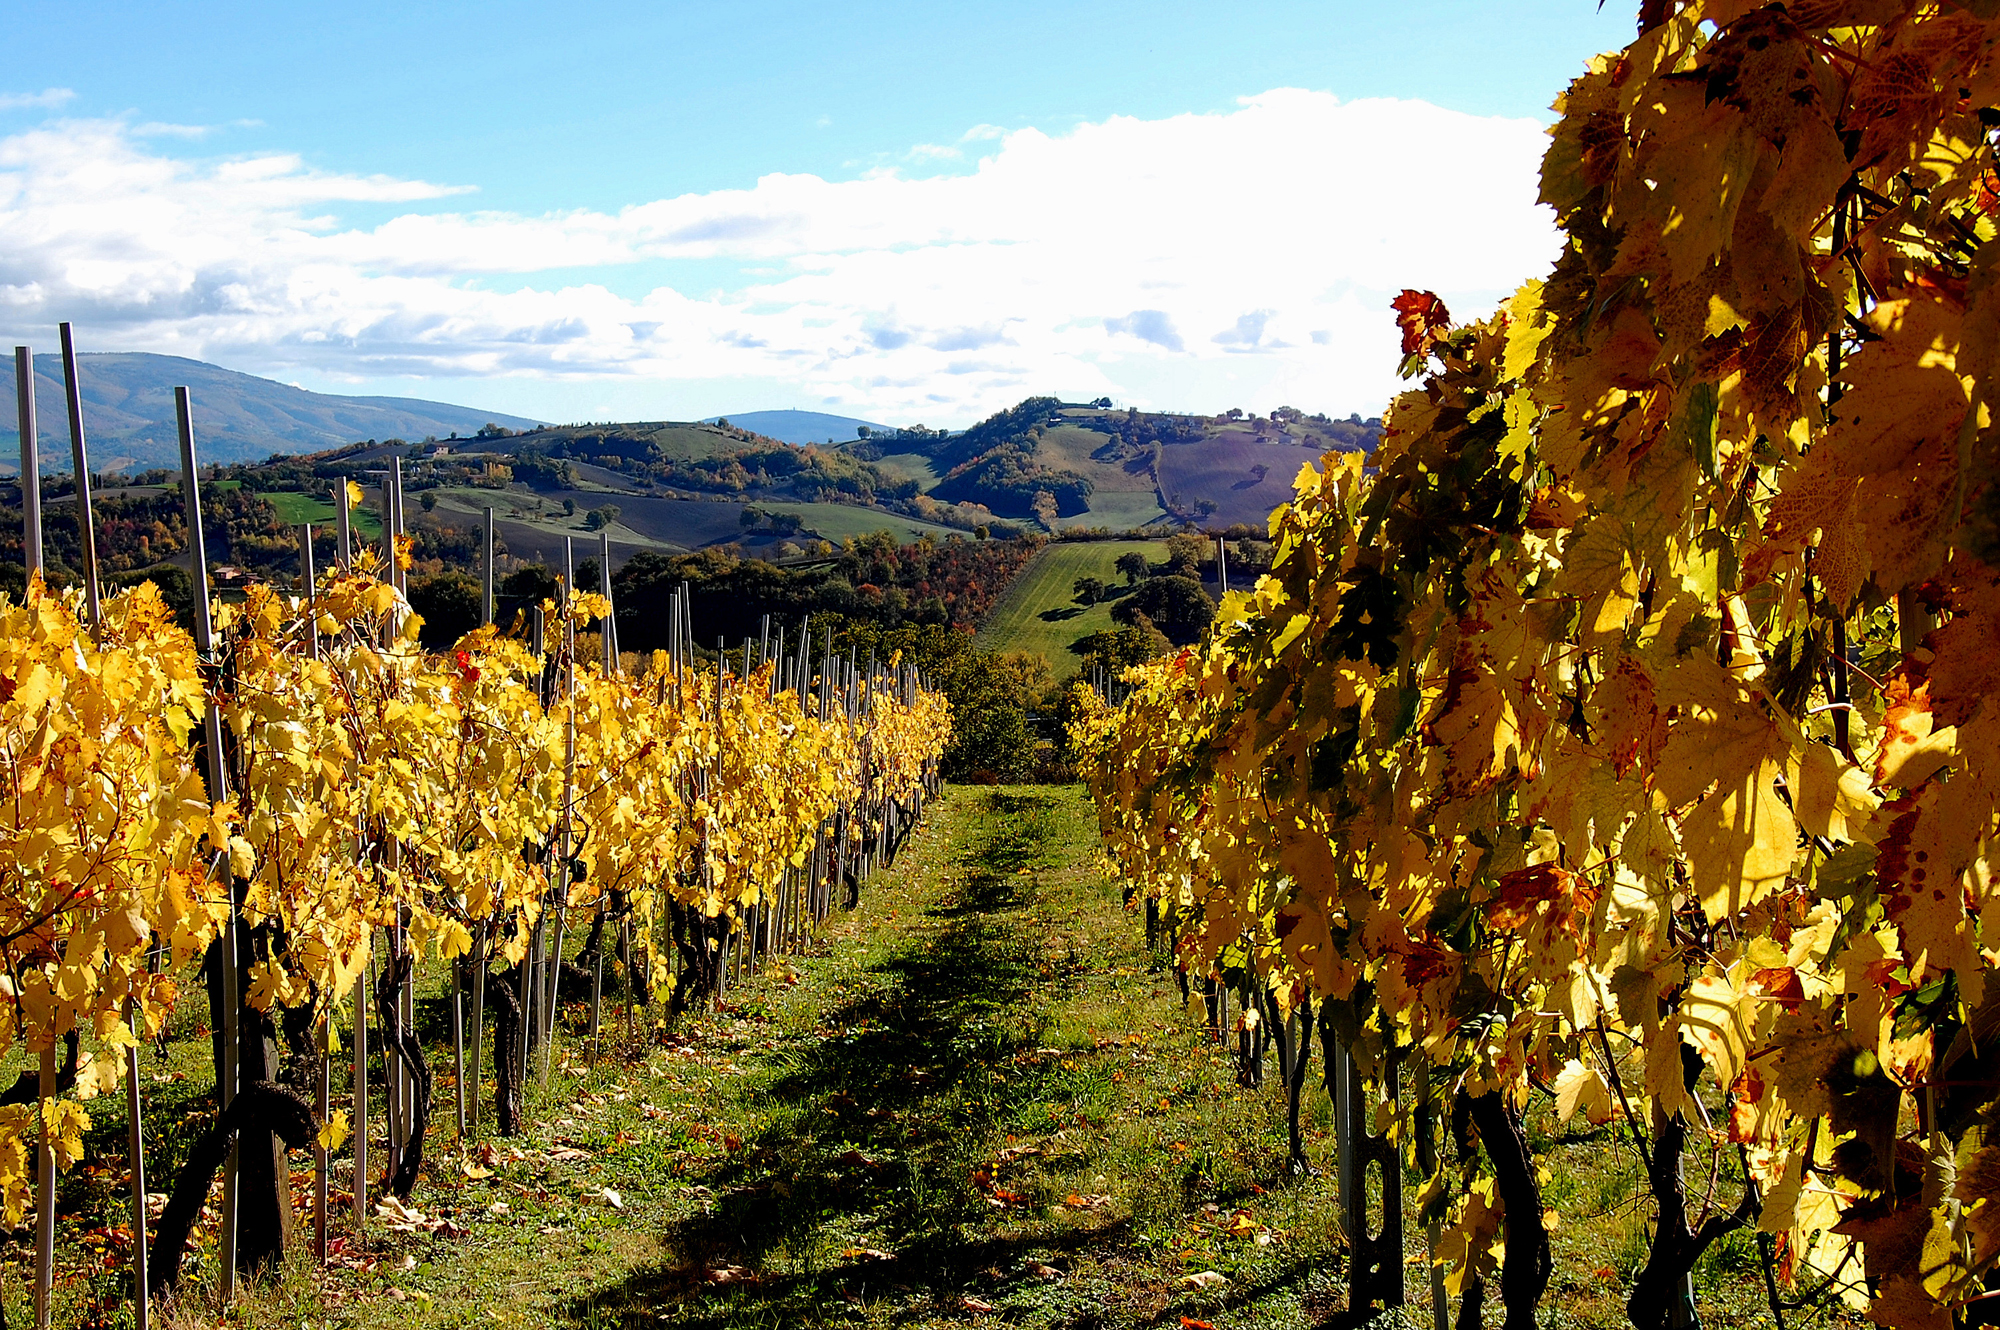 Marche hills: autumn and the vineyard...